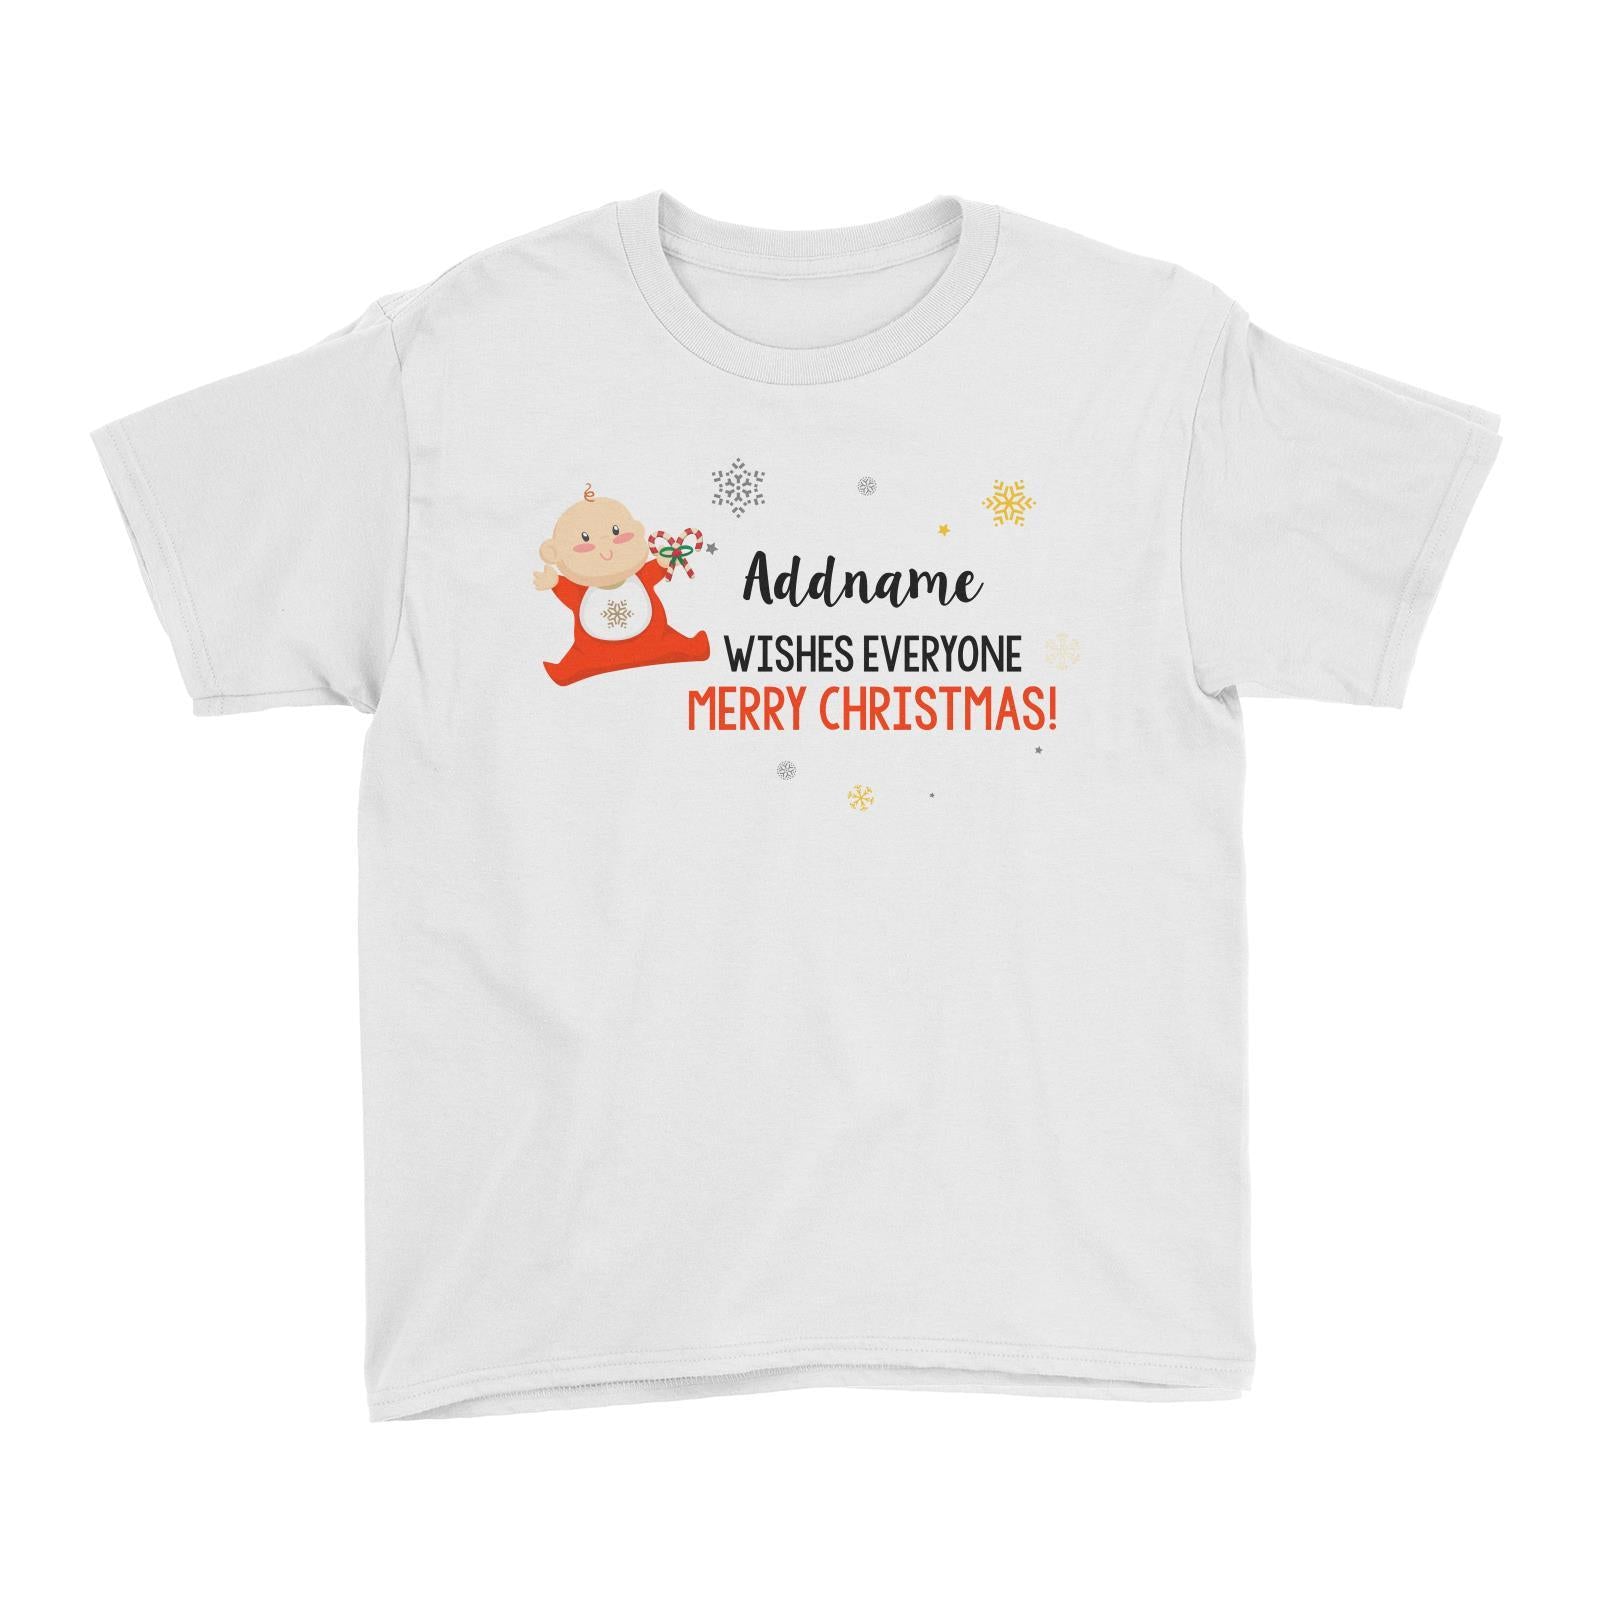 Cute Elf Baby Wishes Everyone Merry Christmas Addname Kid's T-Shirt  Matching Family Personalizable Designs